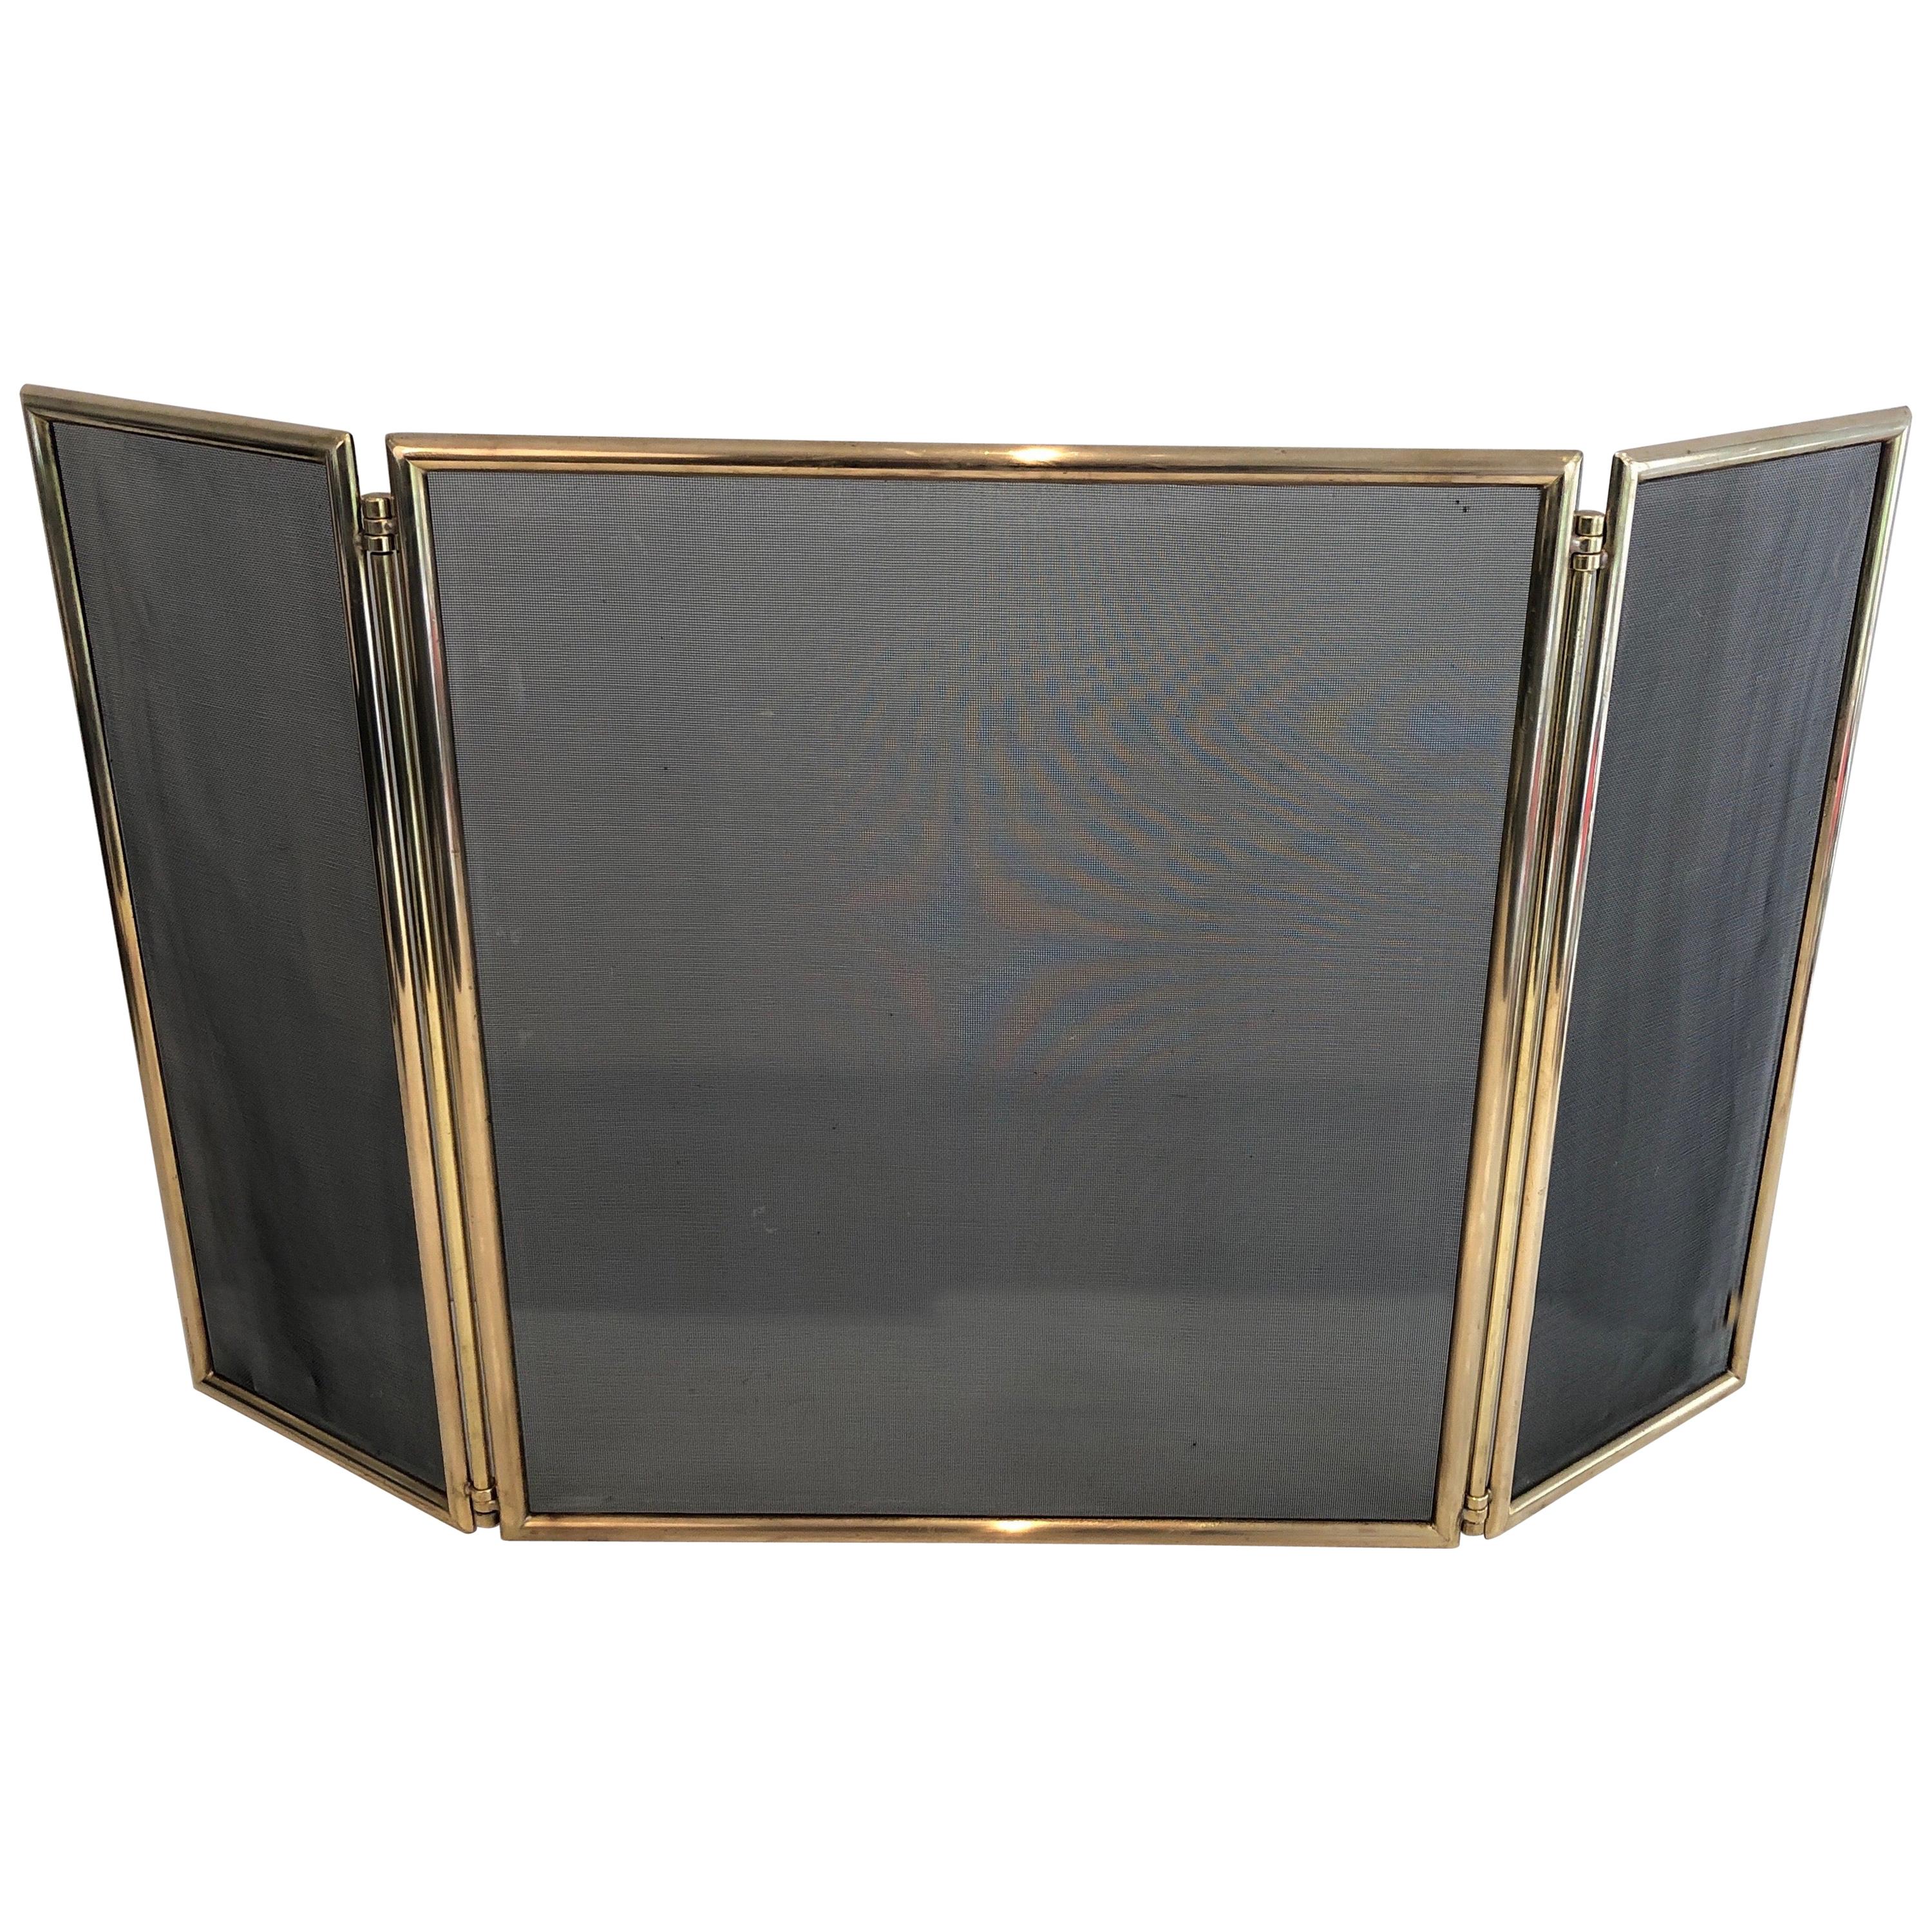 Neoclassical Style Brass and Grilling Folding Fireplace Screen, Circa 1970